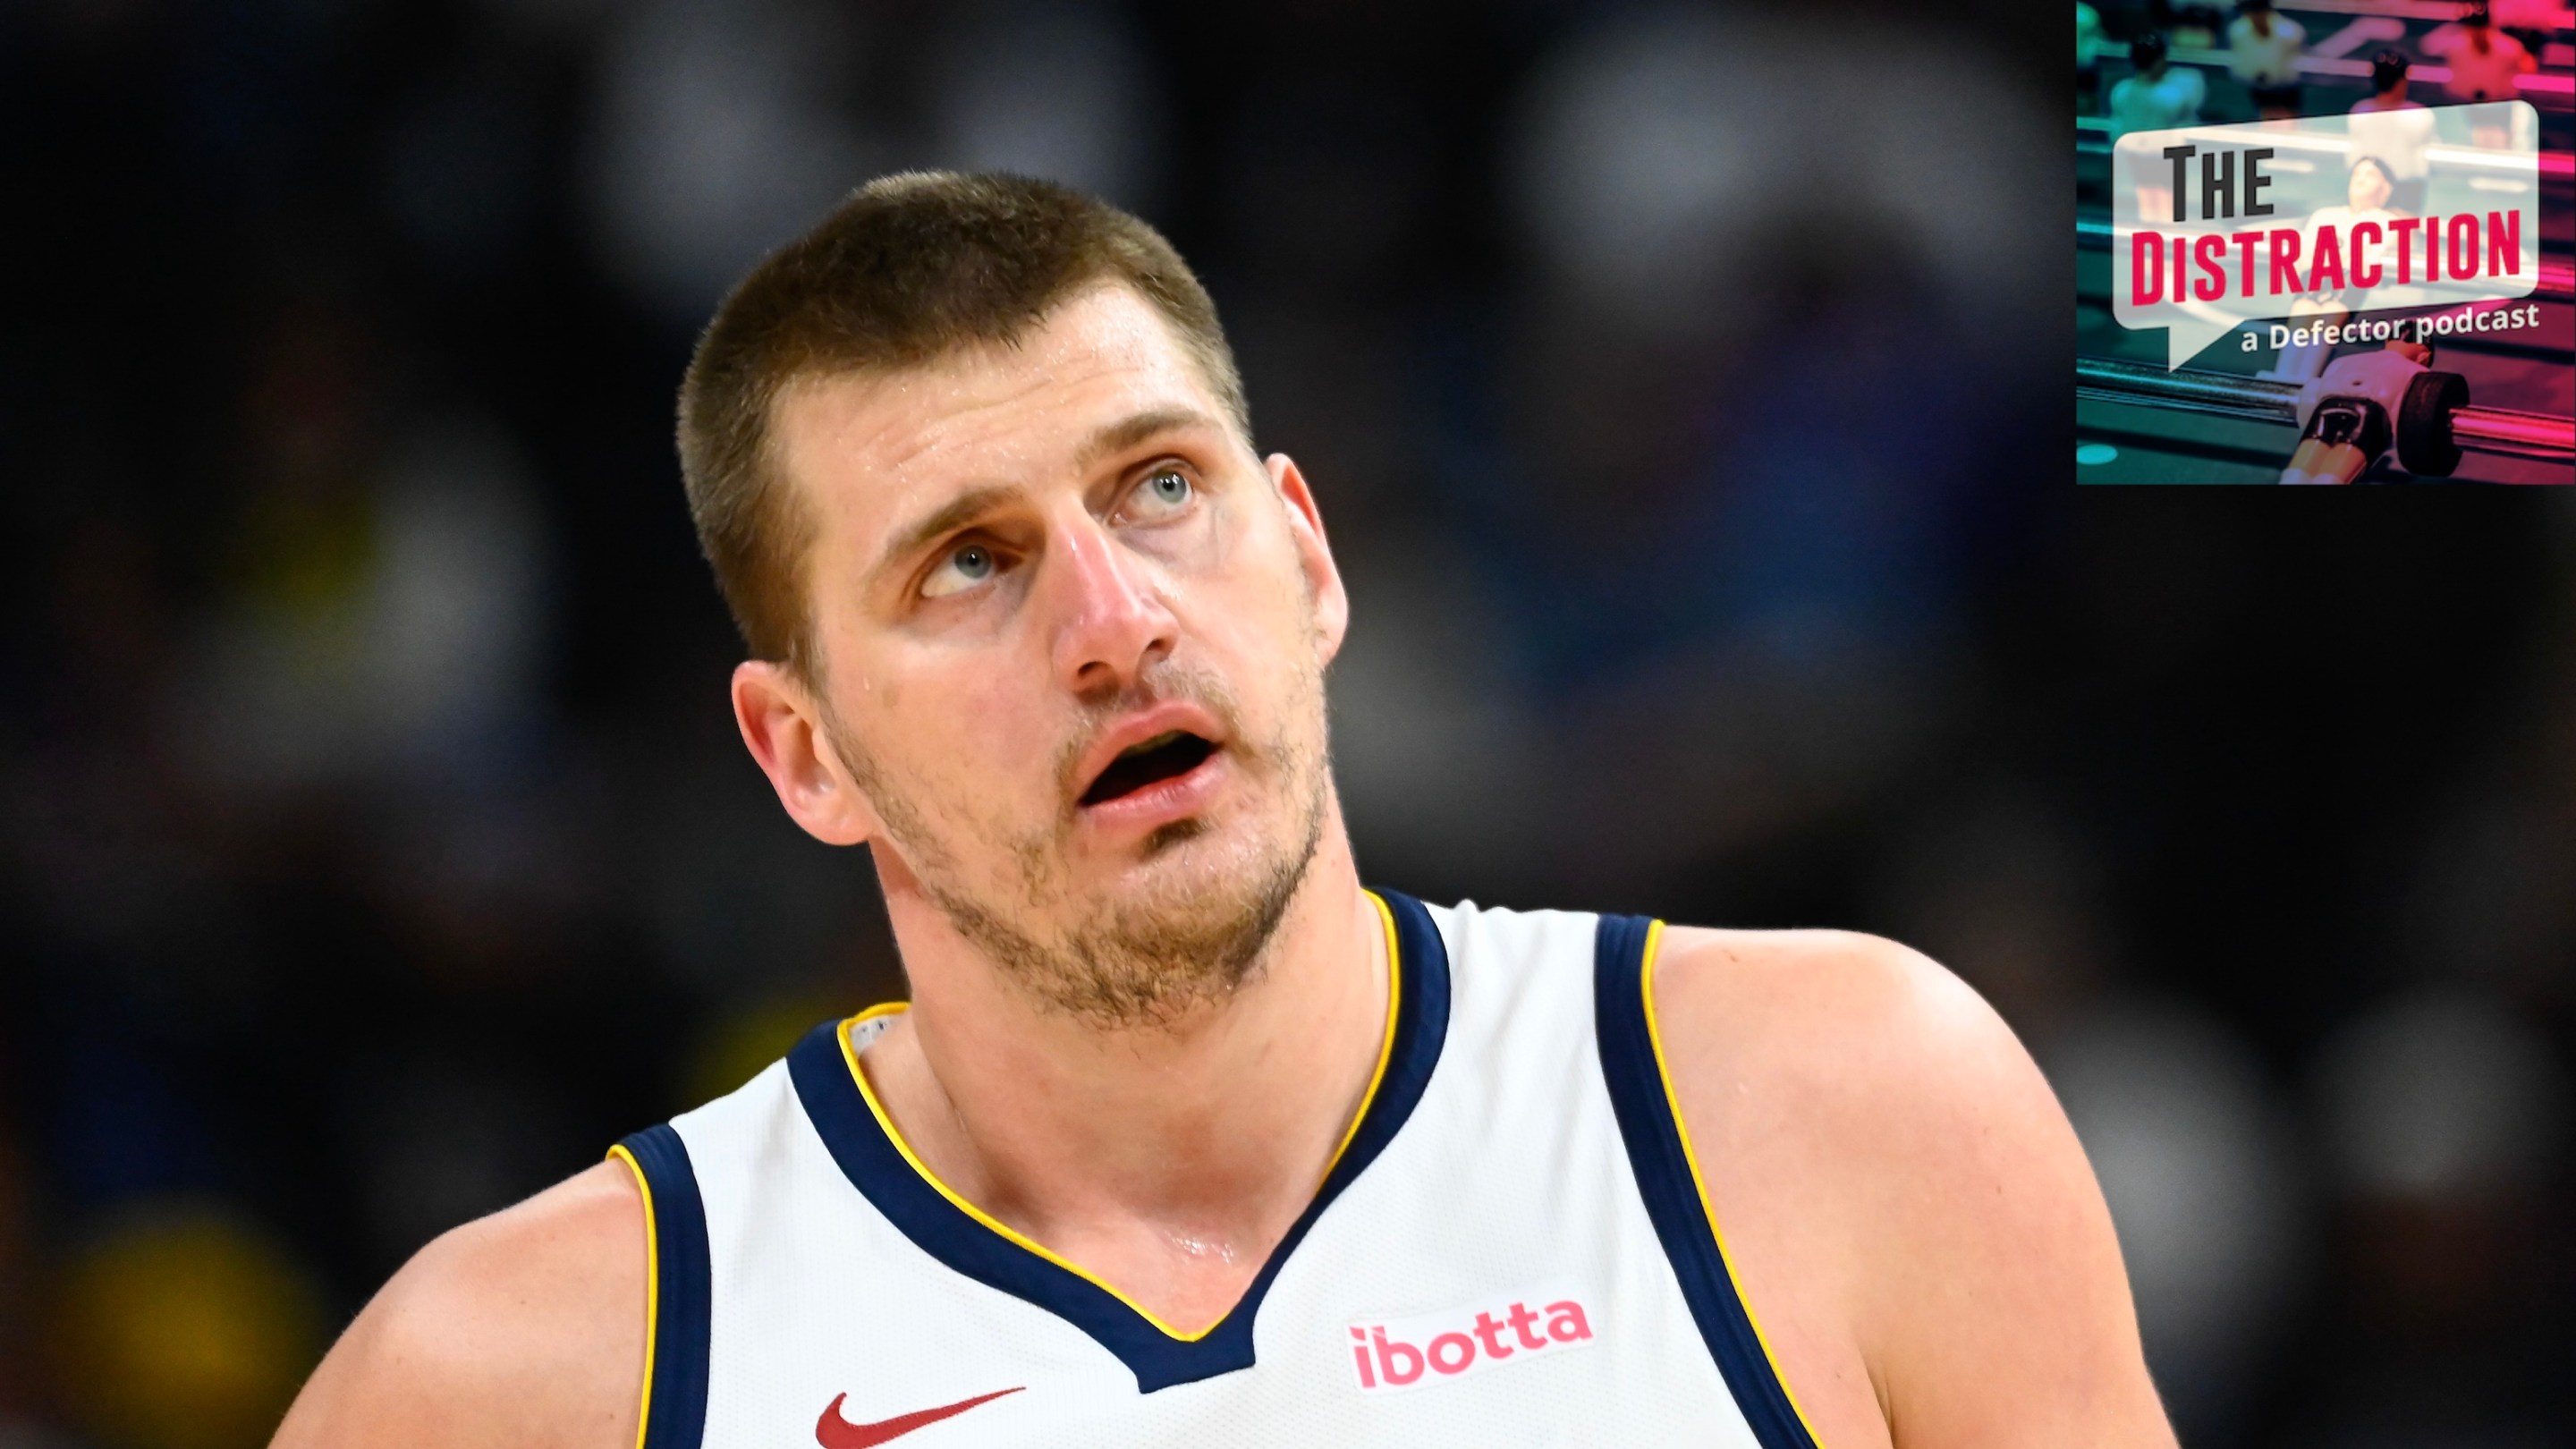 Nikola Jokic #15 of the Denver Nuggets looks on during the first half against the Utah Jazz at Delta Center on April 9, 2024. I put the little Distraction logo at upper right so it looks like he's glowering at it.